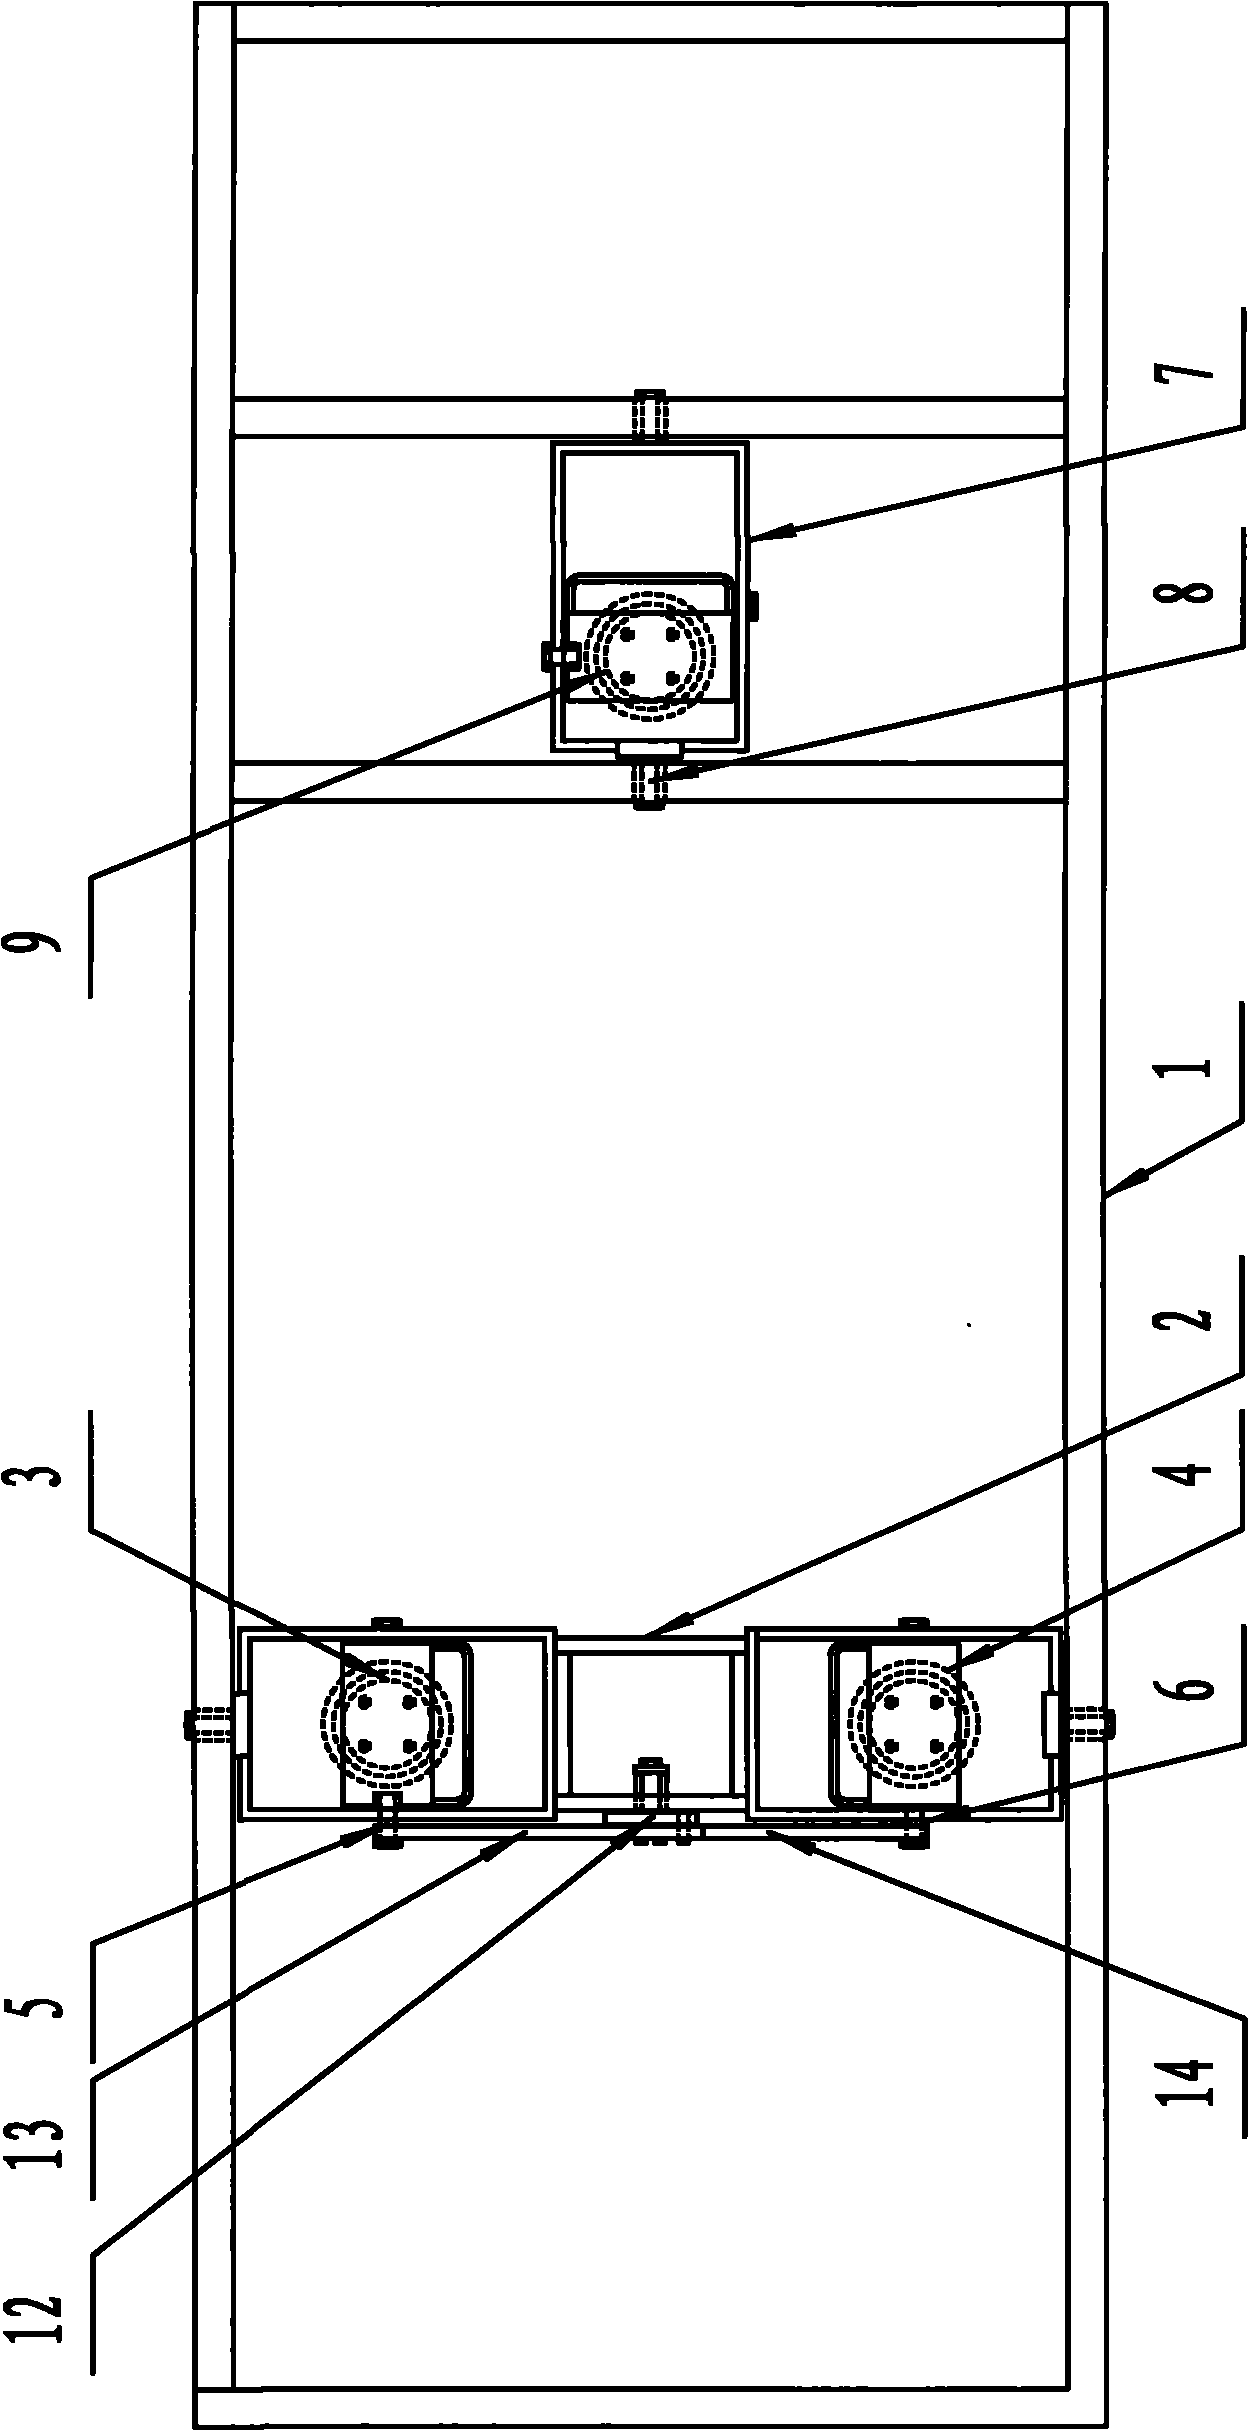 Lateral tilting device for electric bed